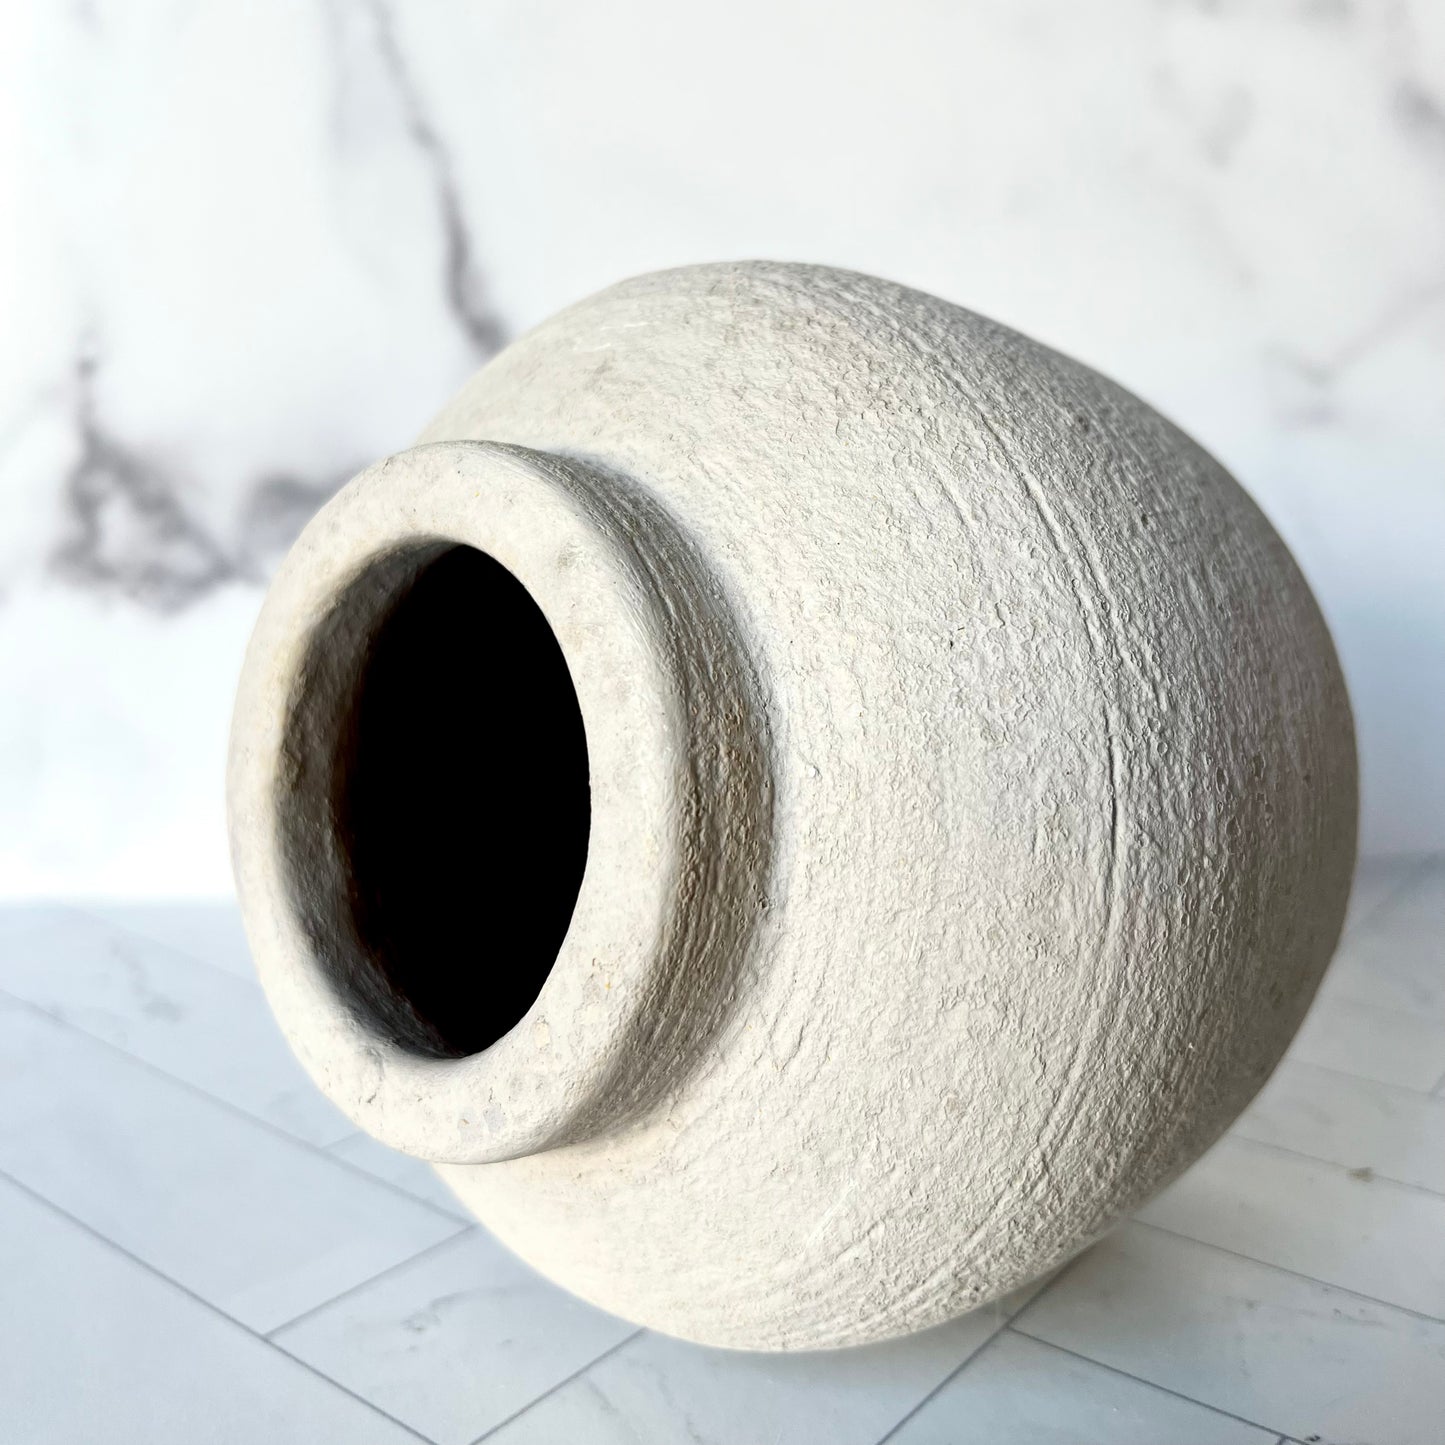 The Petite Concrete Vase shown on its side, revealing the size of the top opening